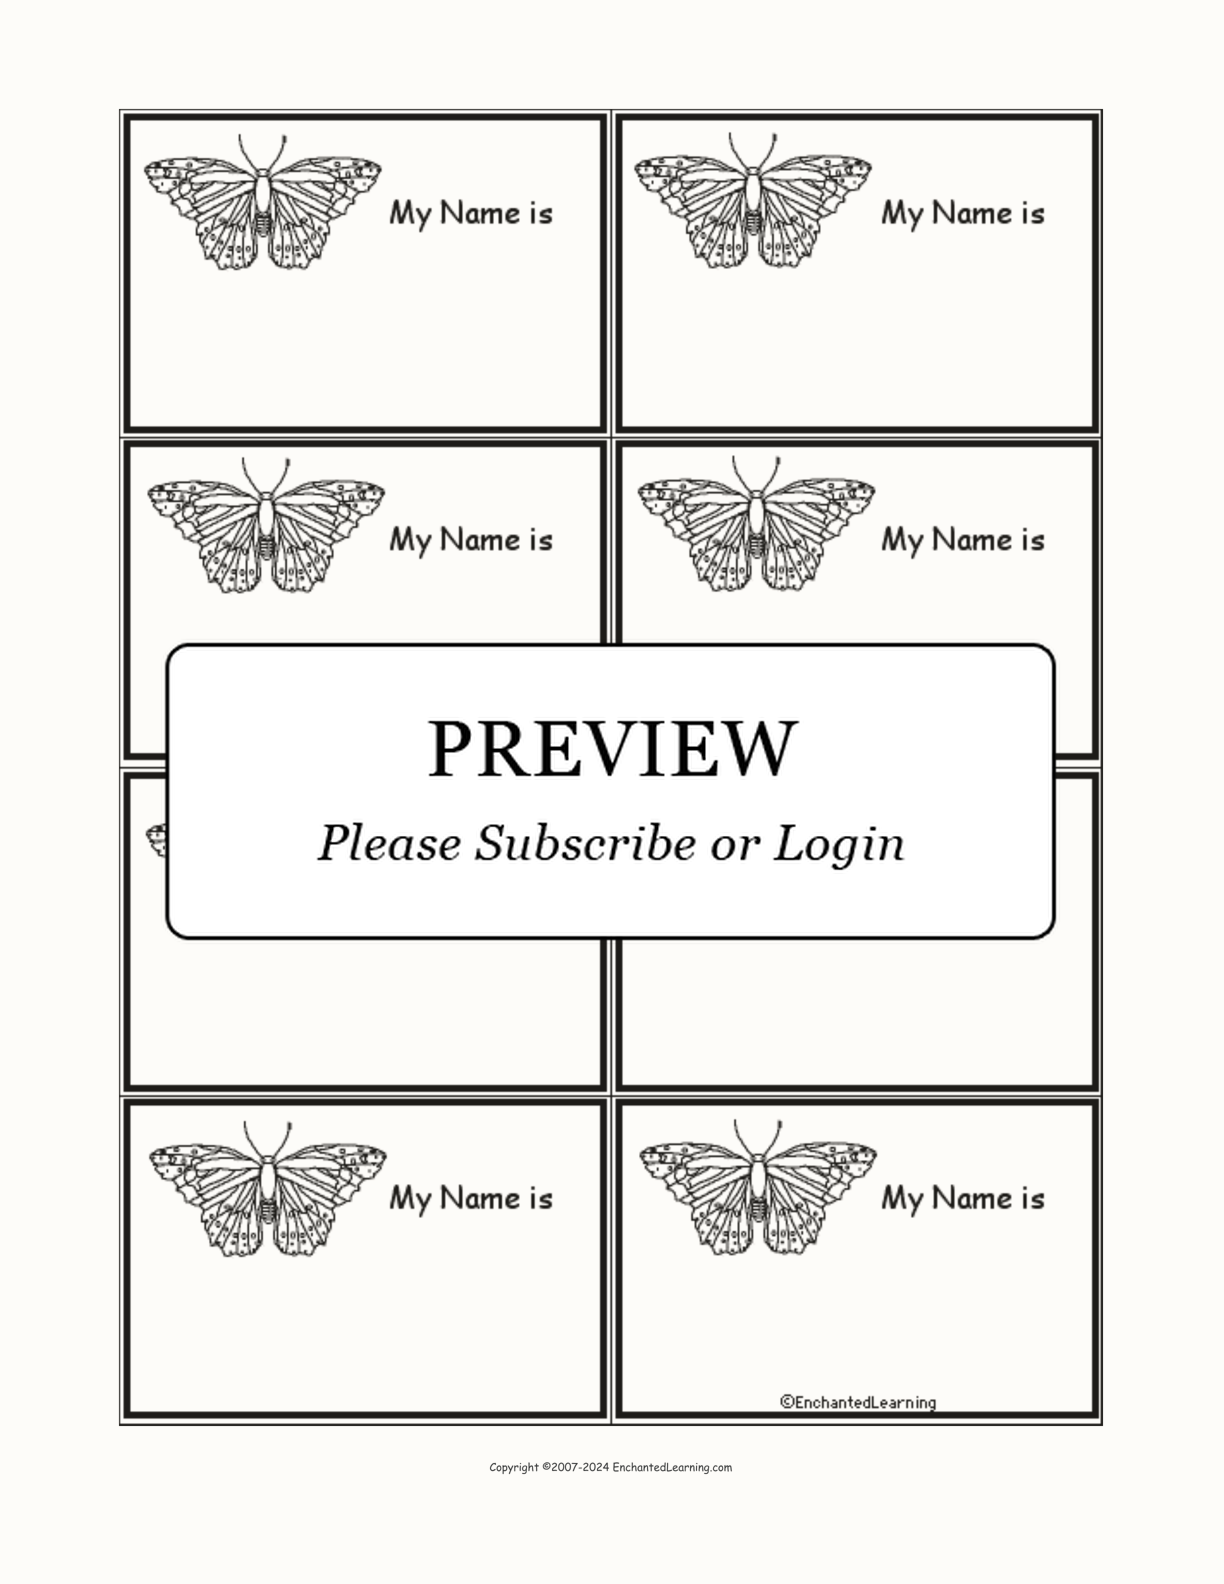 Monarch Butterfly Nametags interactive printout page 1